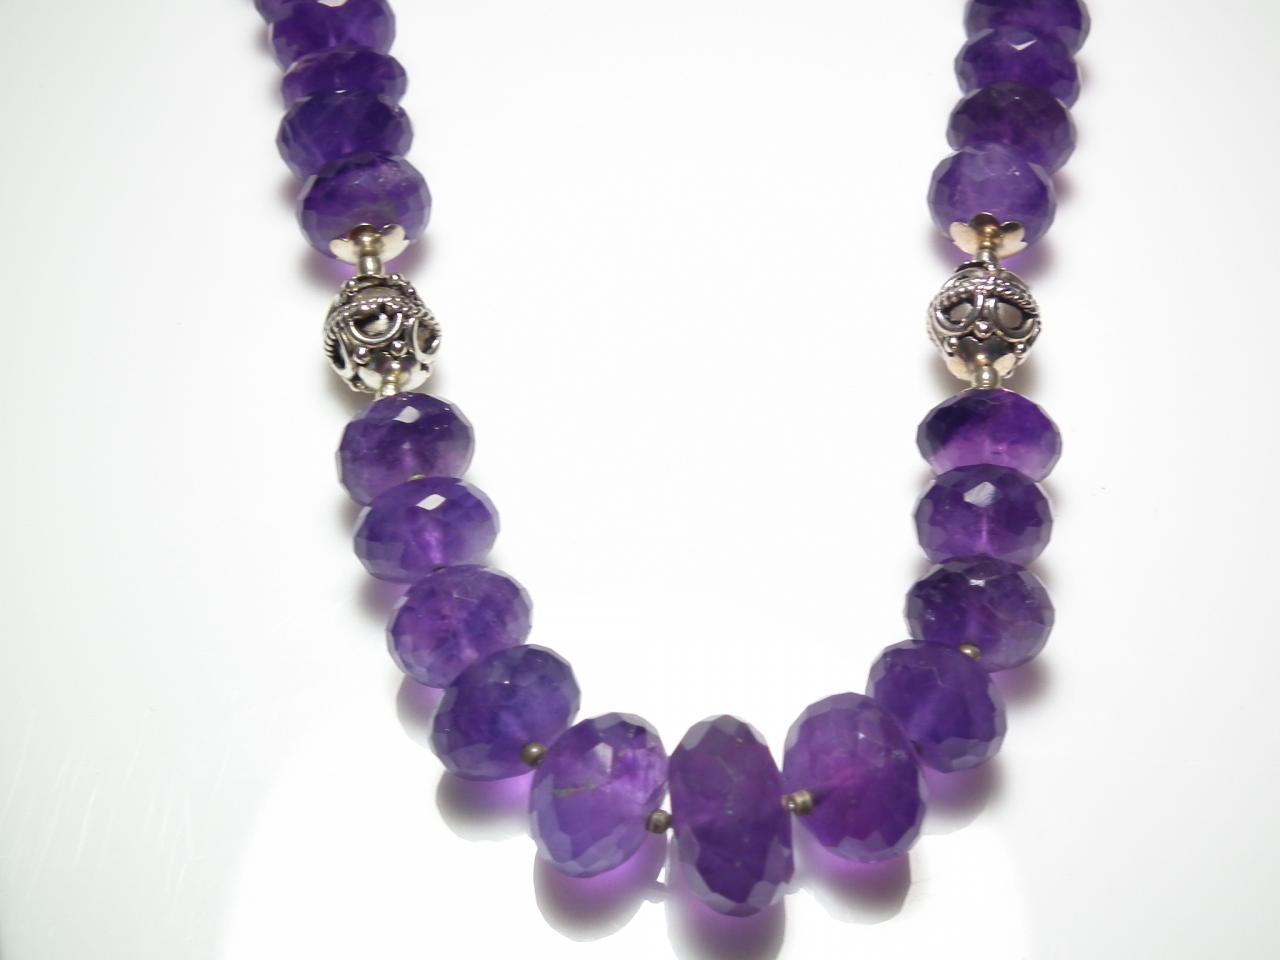 Natural Amethyst Quartz Faceted Beads Necklace, Semi Precious Stone Necklace,karen Silver,weight-333-cts